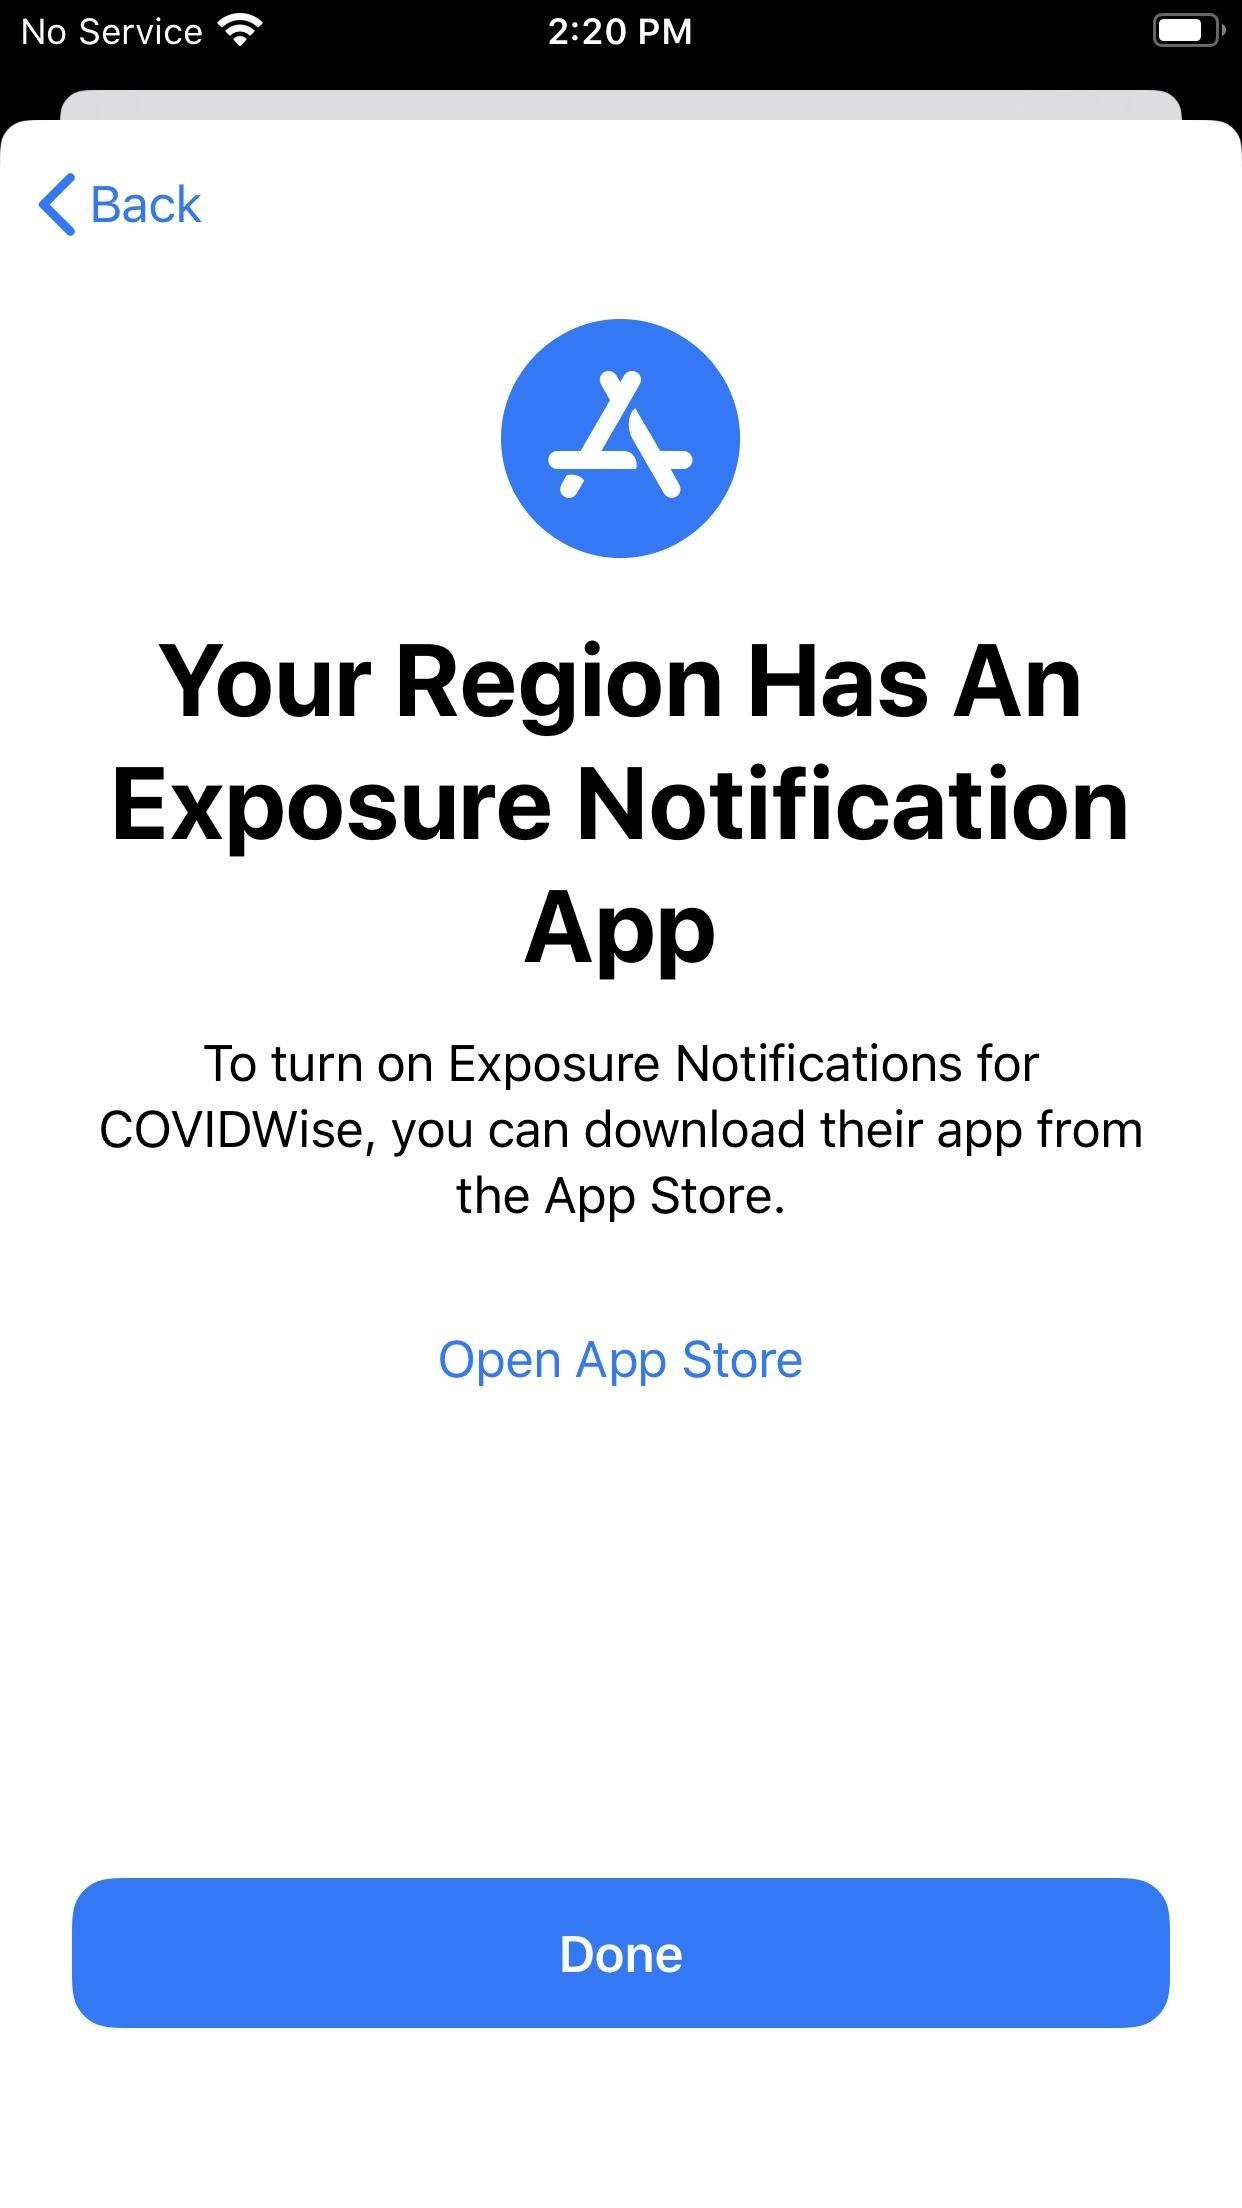 Apple Releases iOS 13.7 for iPhone, Includes COVID-19 Exposure Notification Support Without Using an App